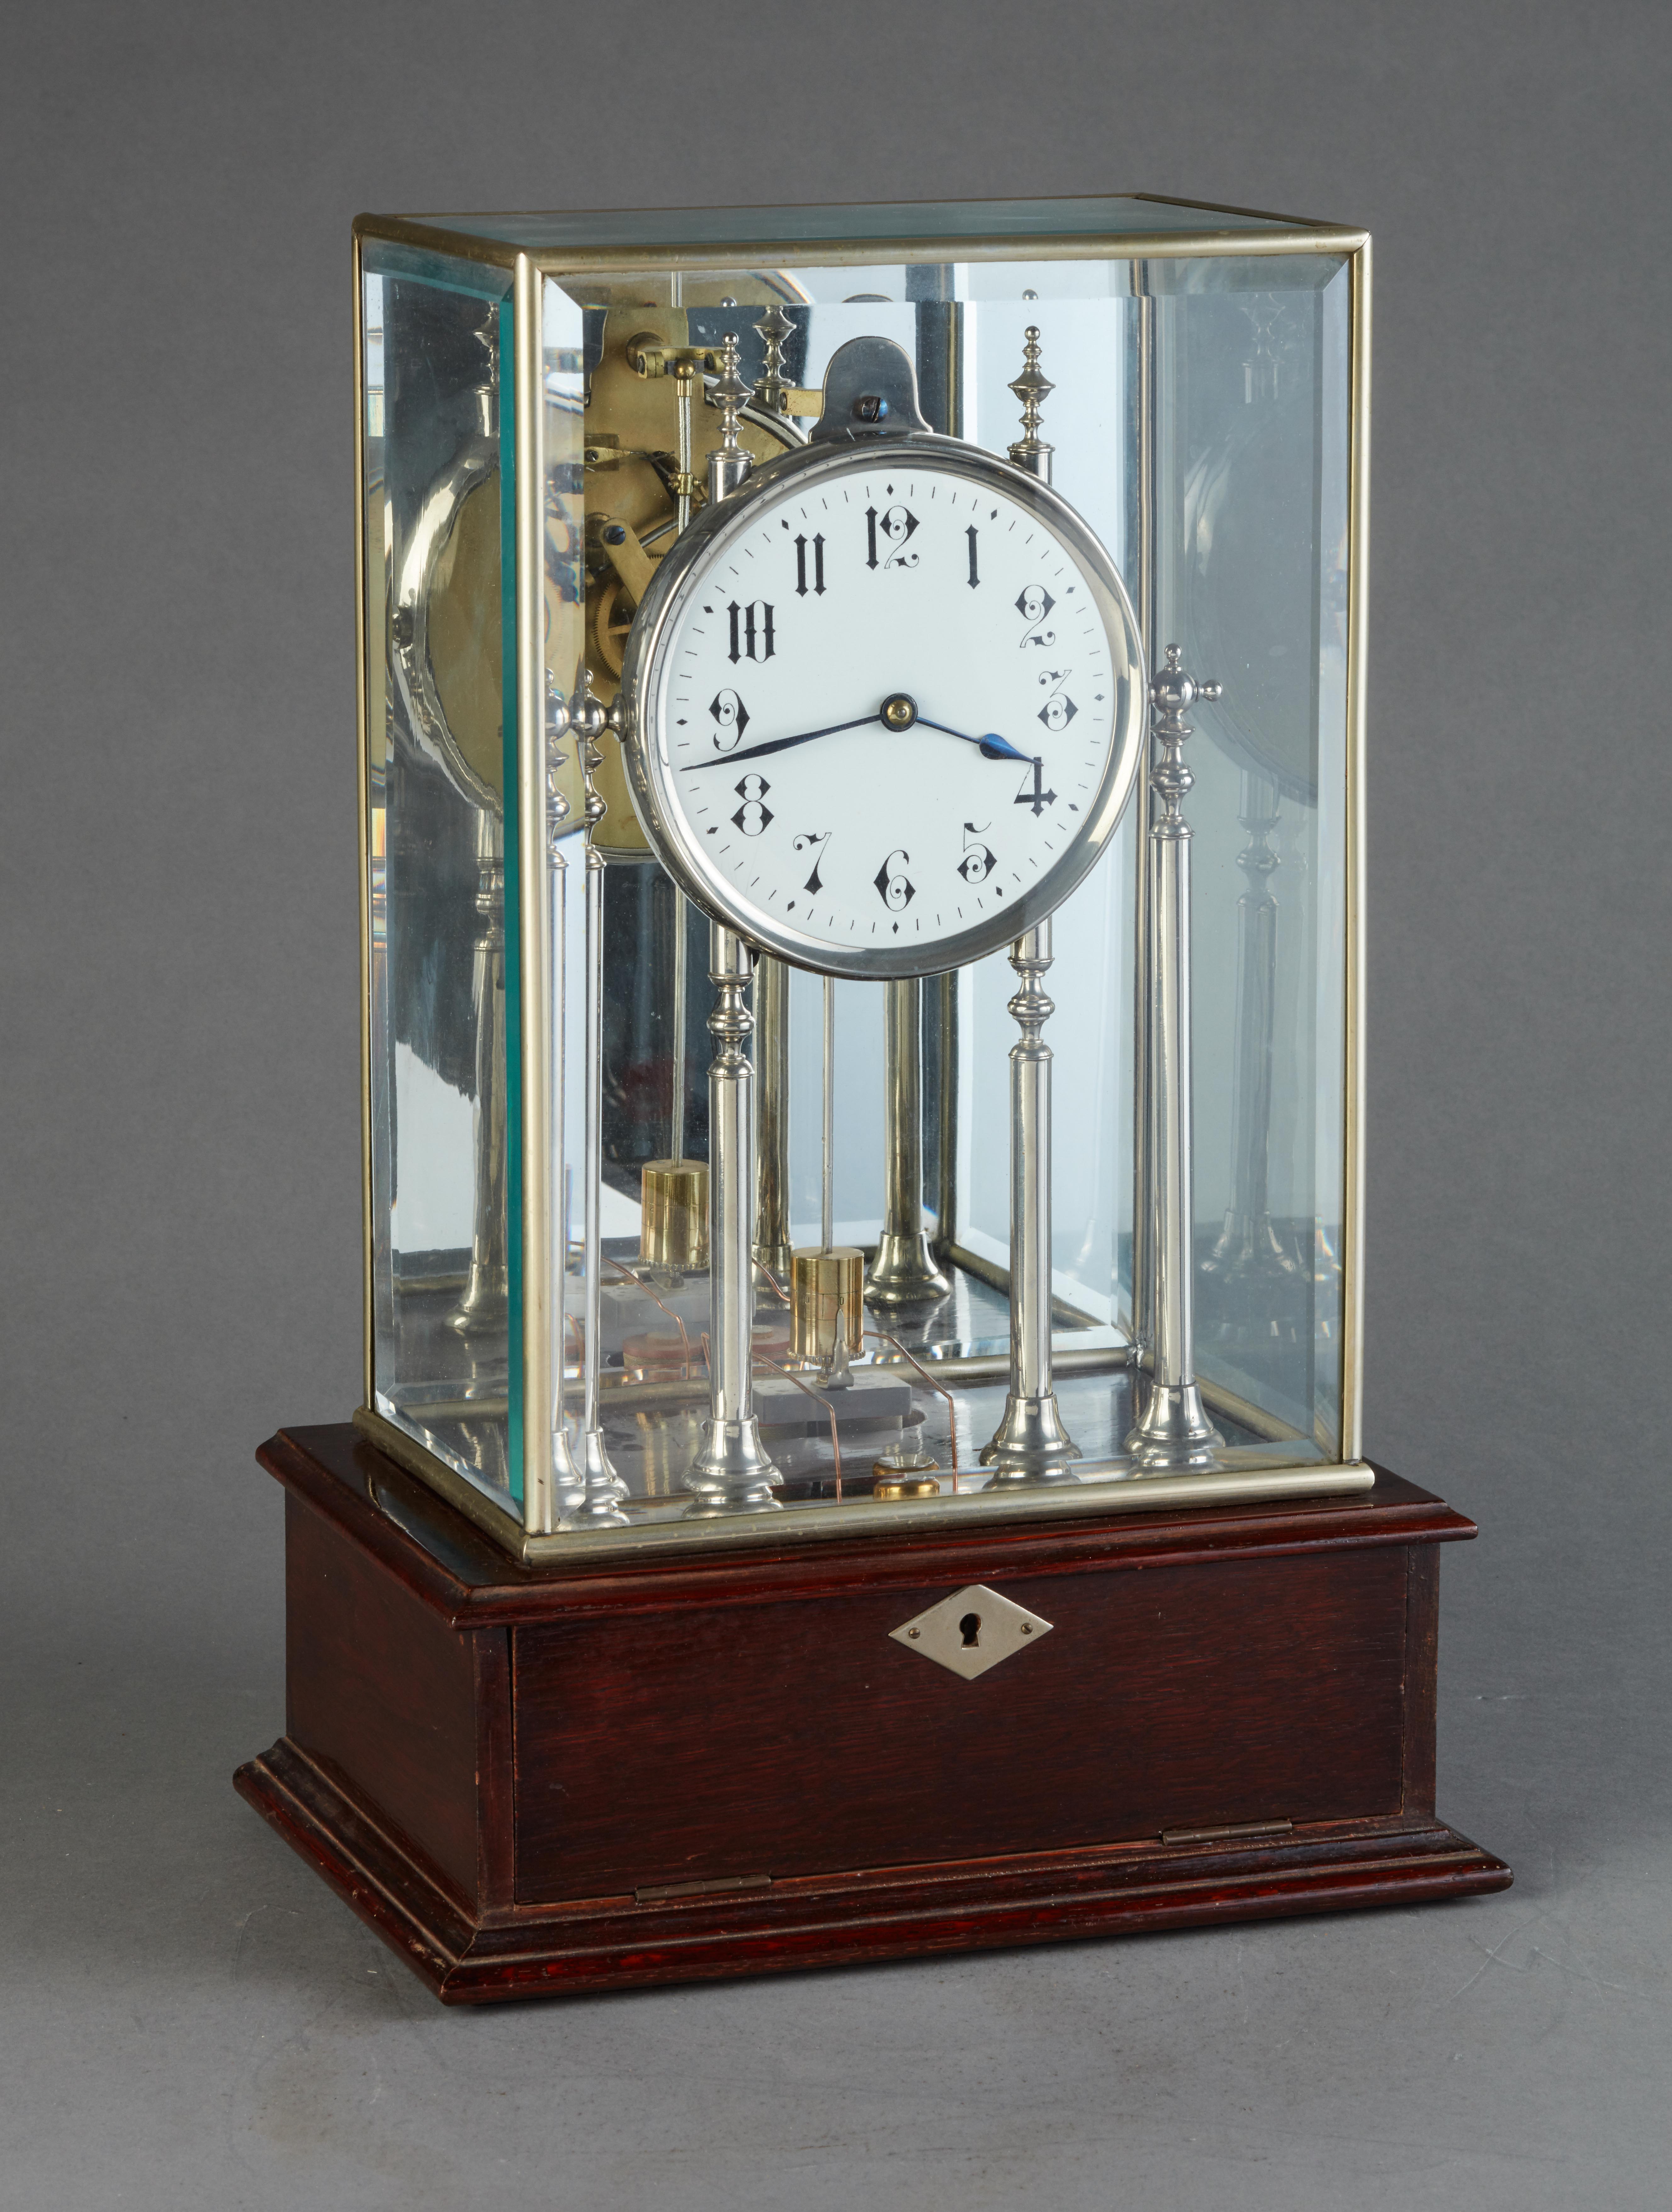 Untouched four glass electrical mantel clock from 